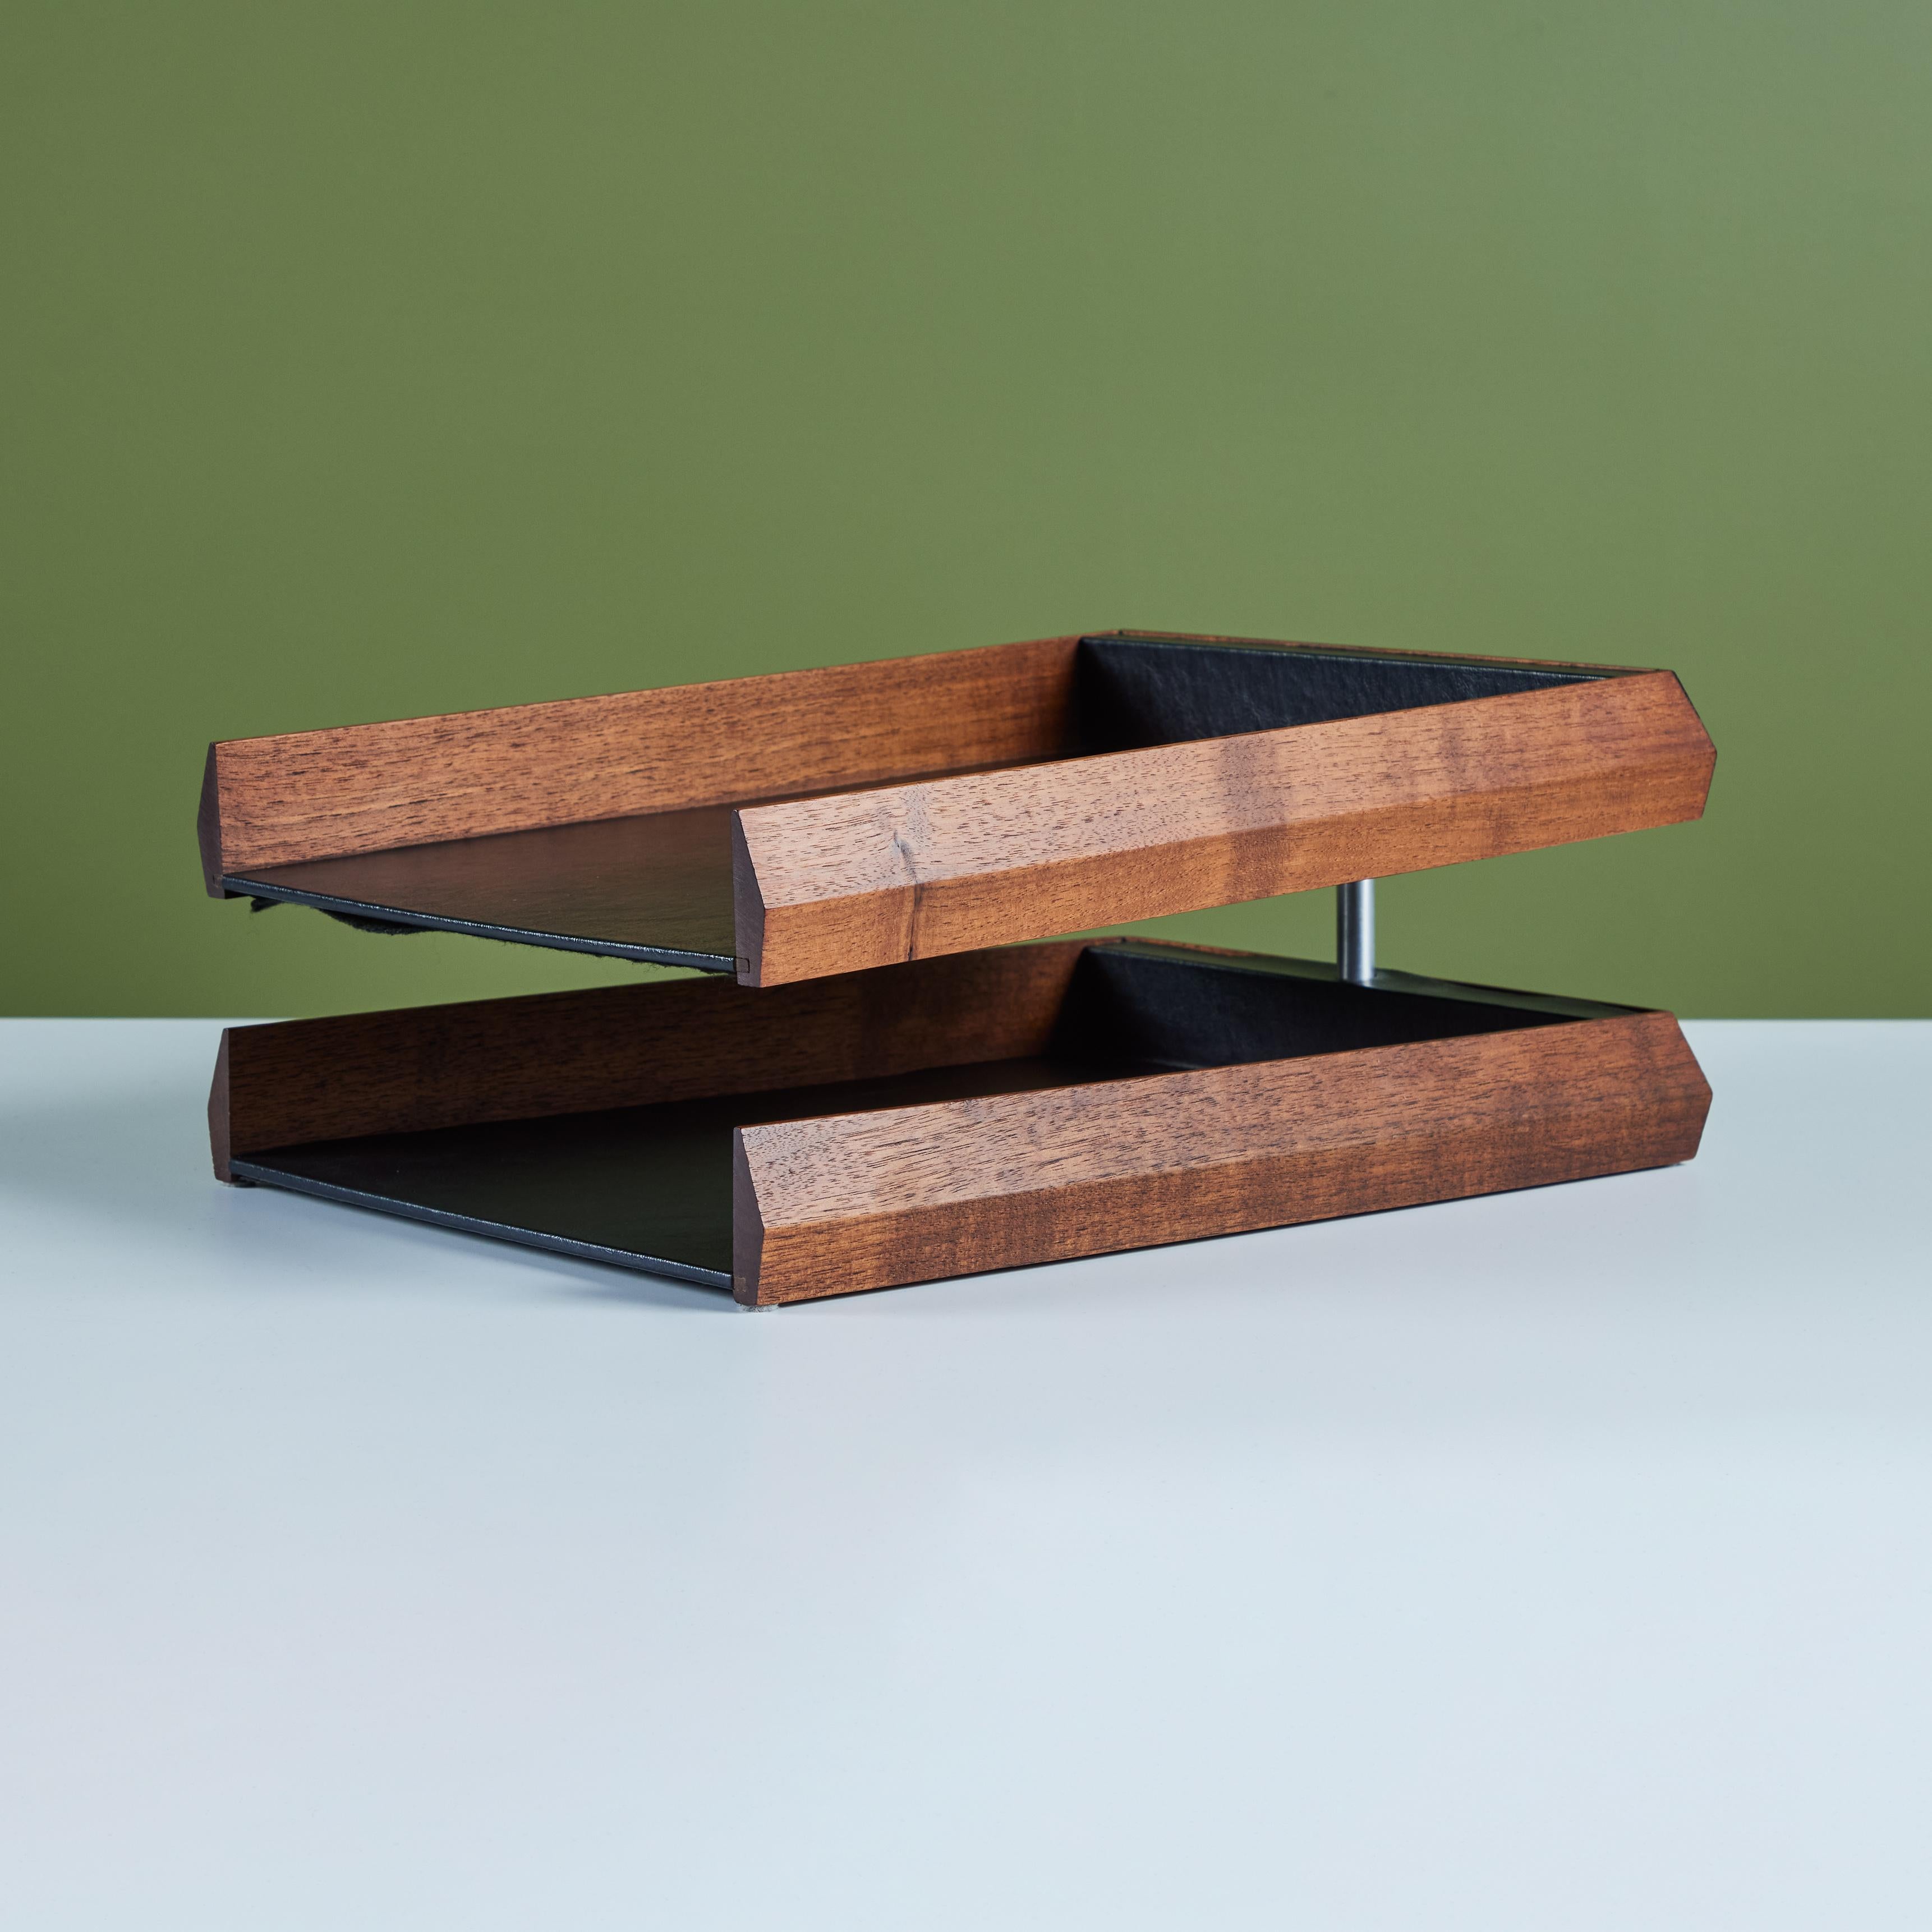 Walnut and naugahyde paper tray. The tray features dual black naugahyde lined trays, with oiled walnut cases and a stainless steel pin supporting the upper tier.

Dimensions: 
11